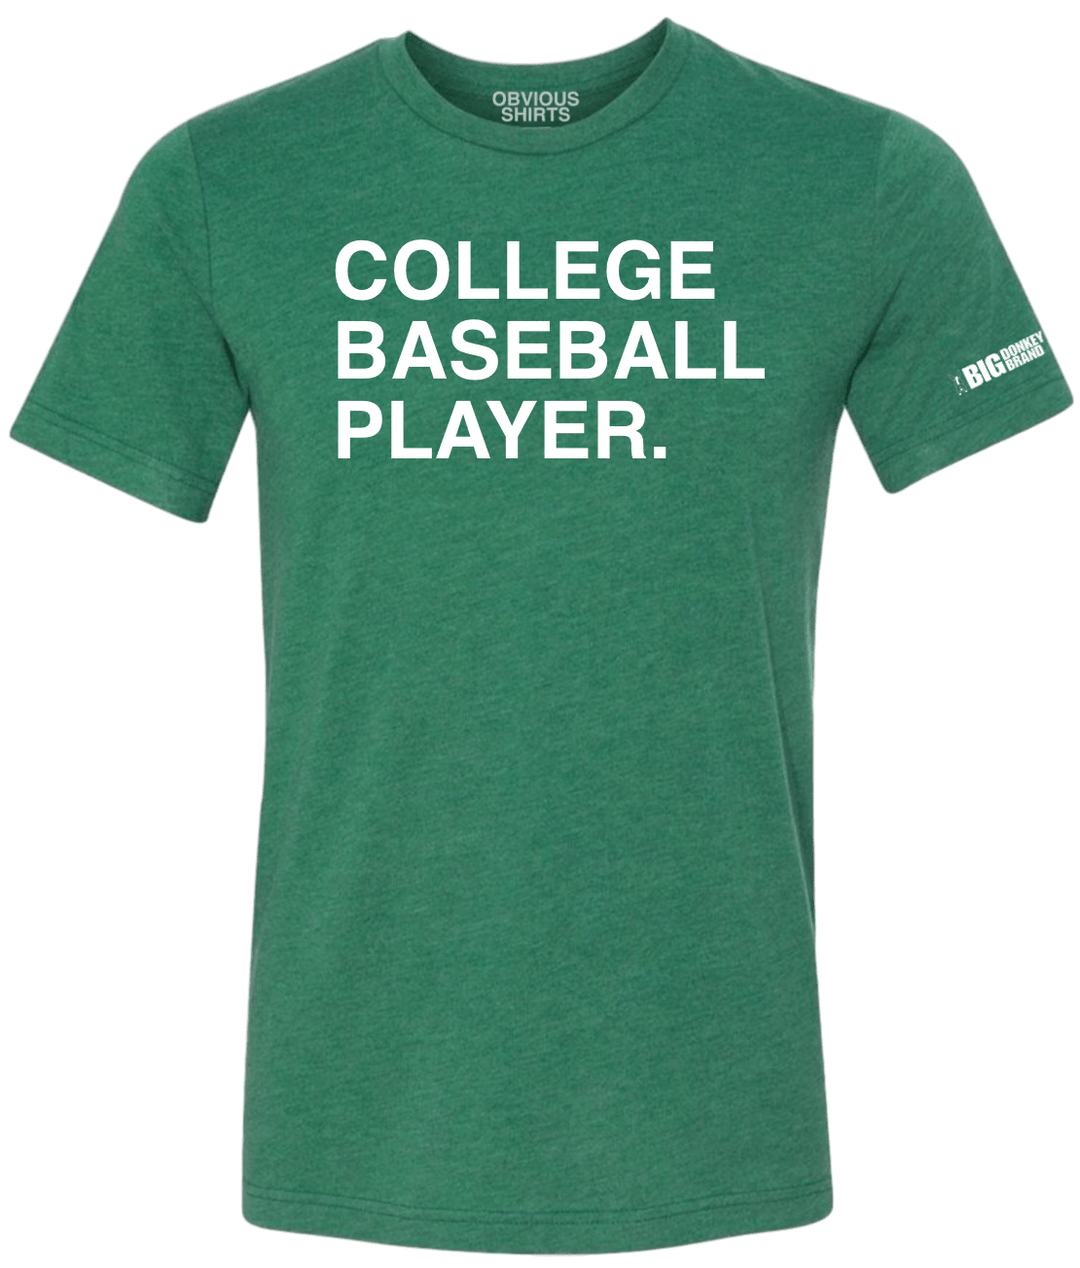 COLLEGE BASEBALL PLAYER. (CUSTOMIZE) - OBVIOUS SHIRTS